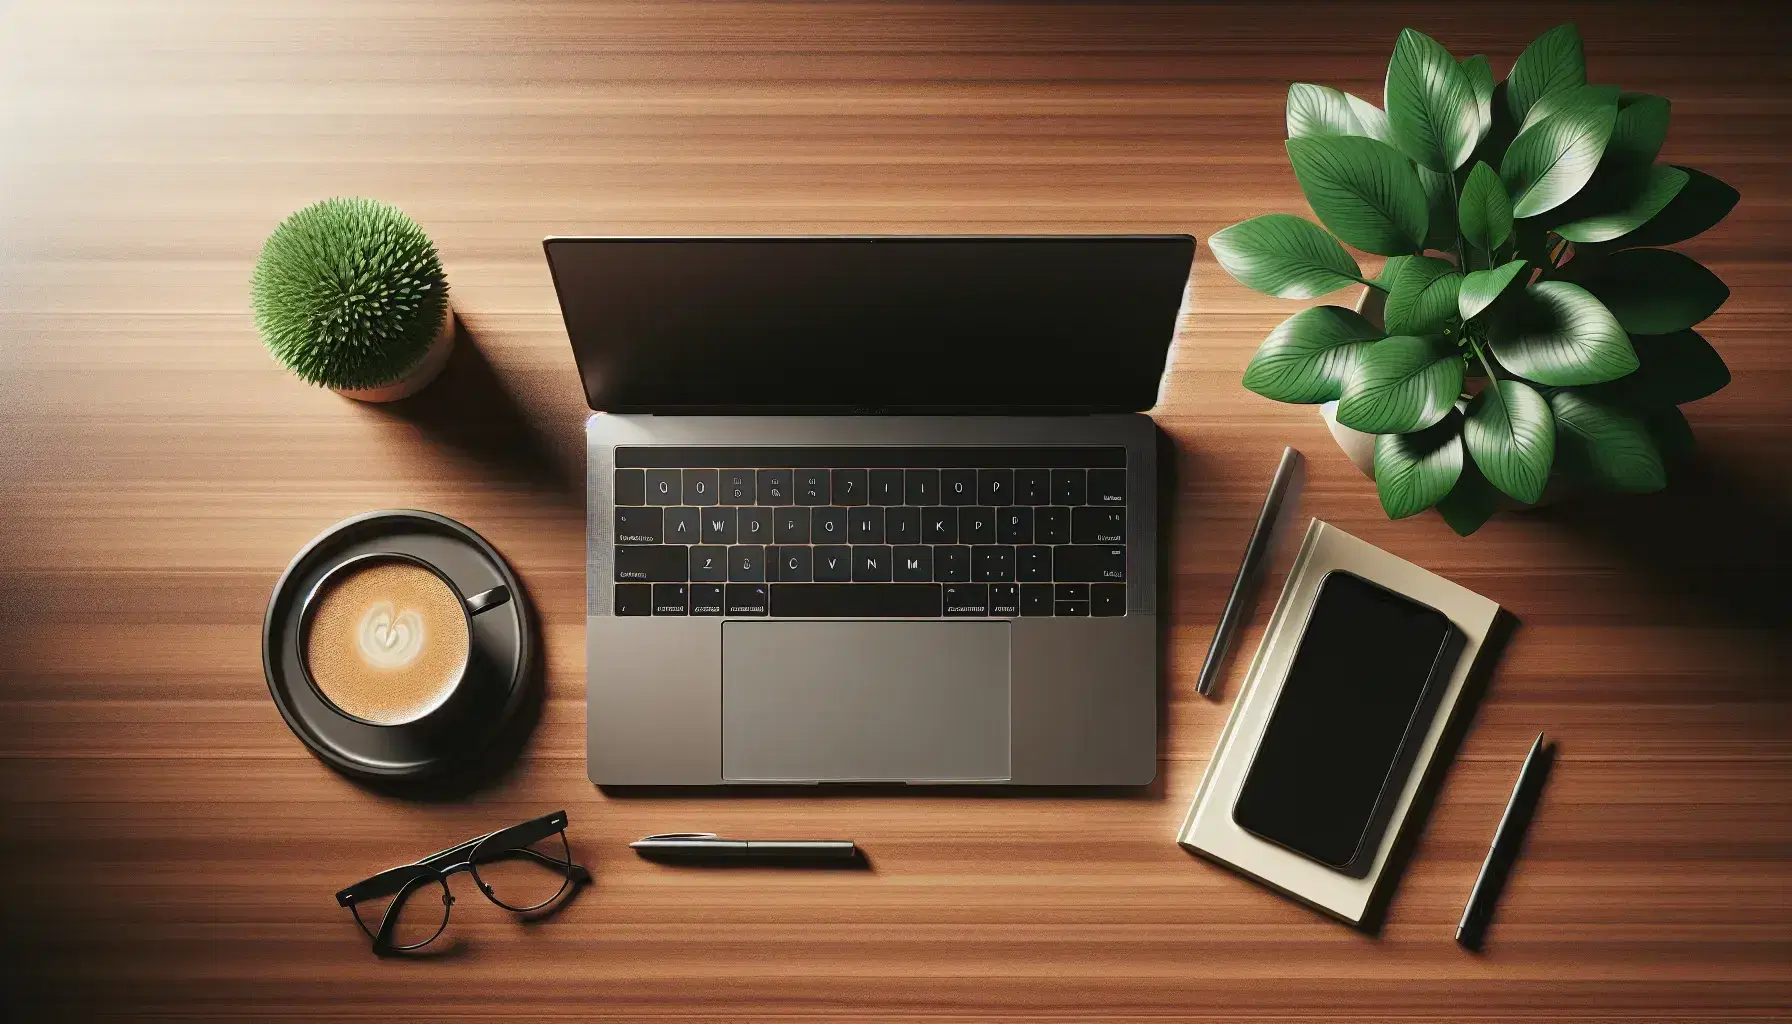 Organized desk with open laptop, green plant, cup of steaming coffee and black glasses on light brown wooden surface.